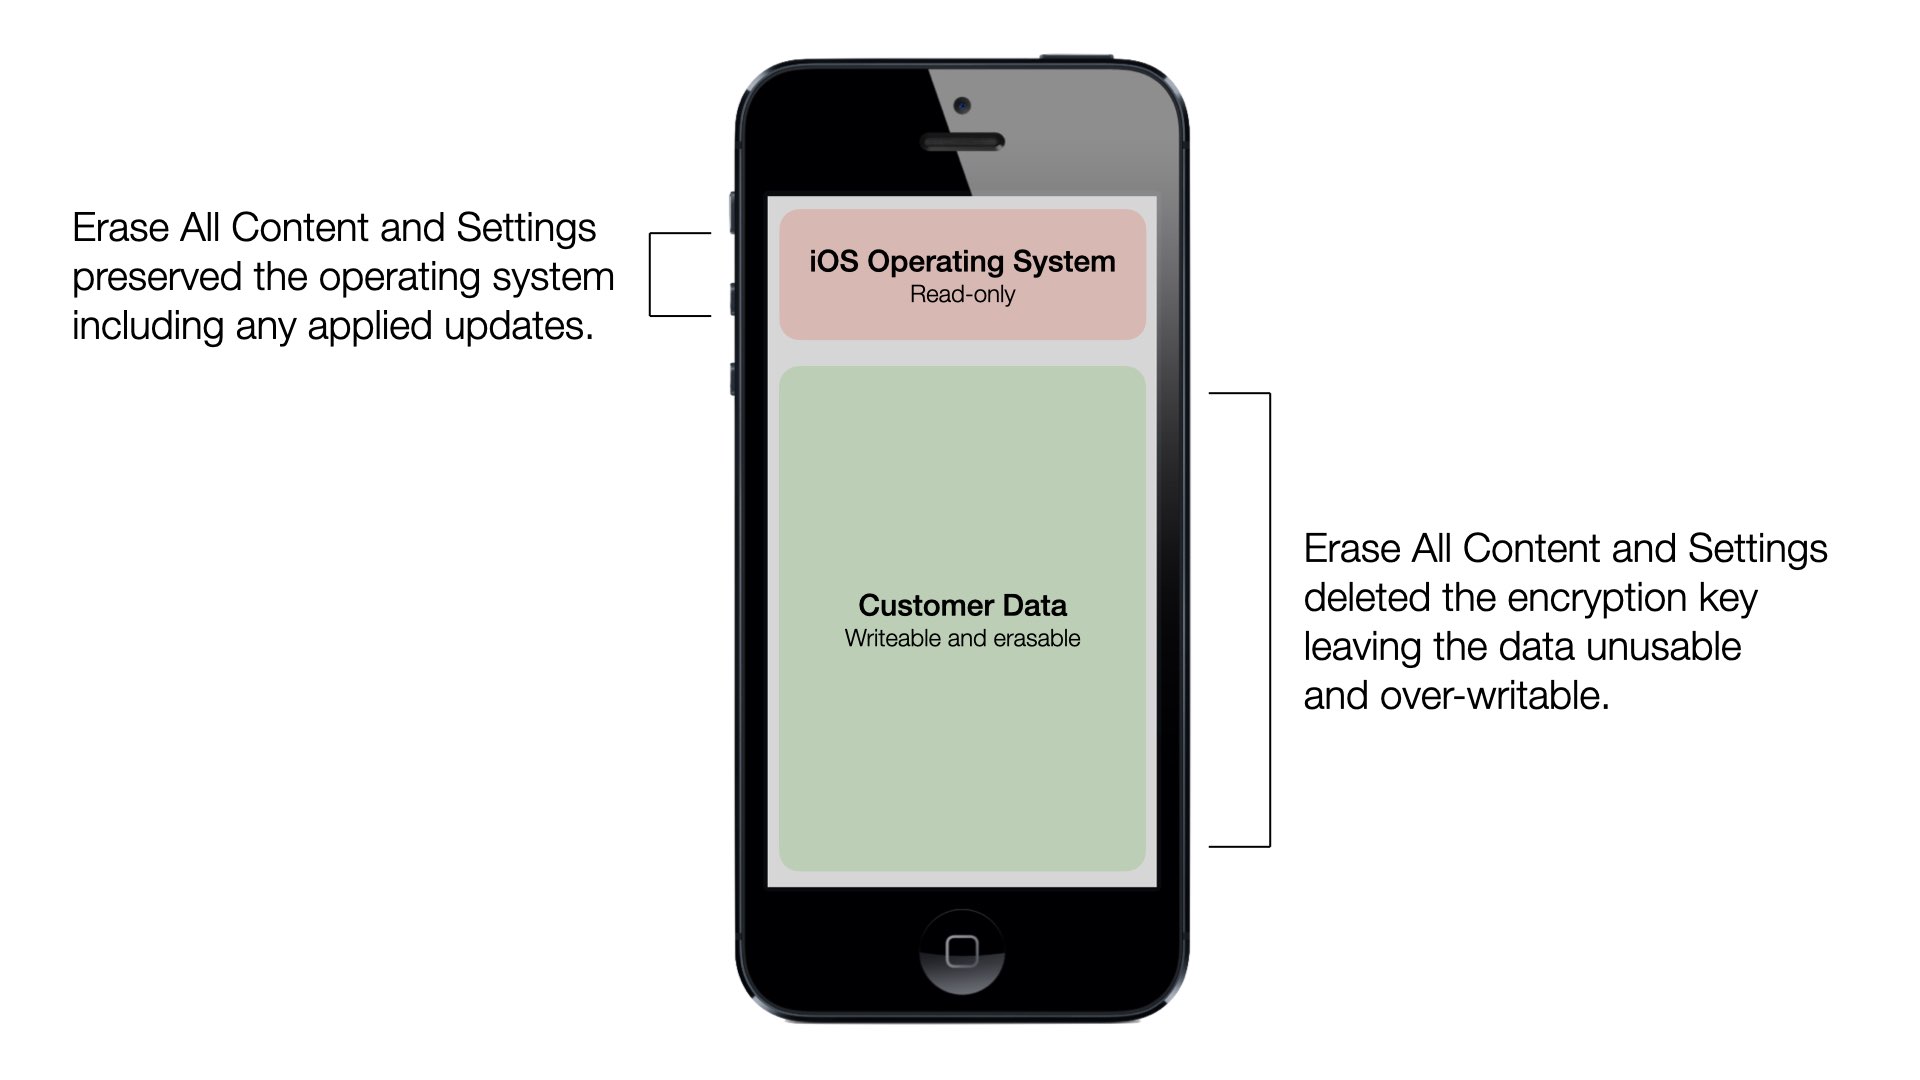 Diagram showing how Erase All Content and Settings preserves the operating system while making customer data unusable and over-writable